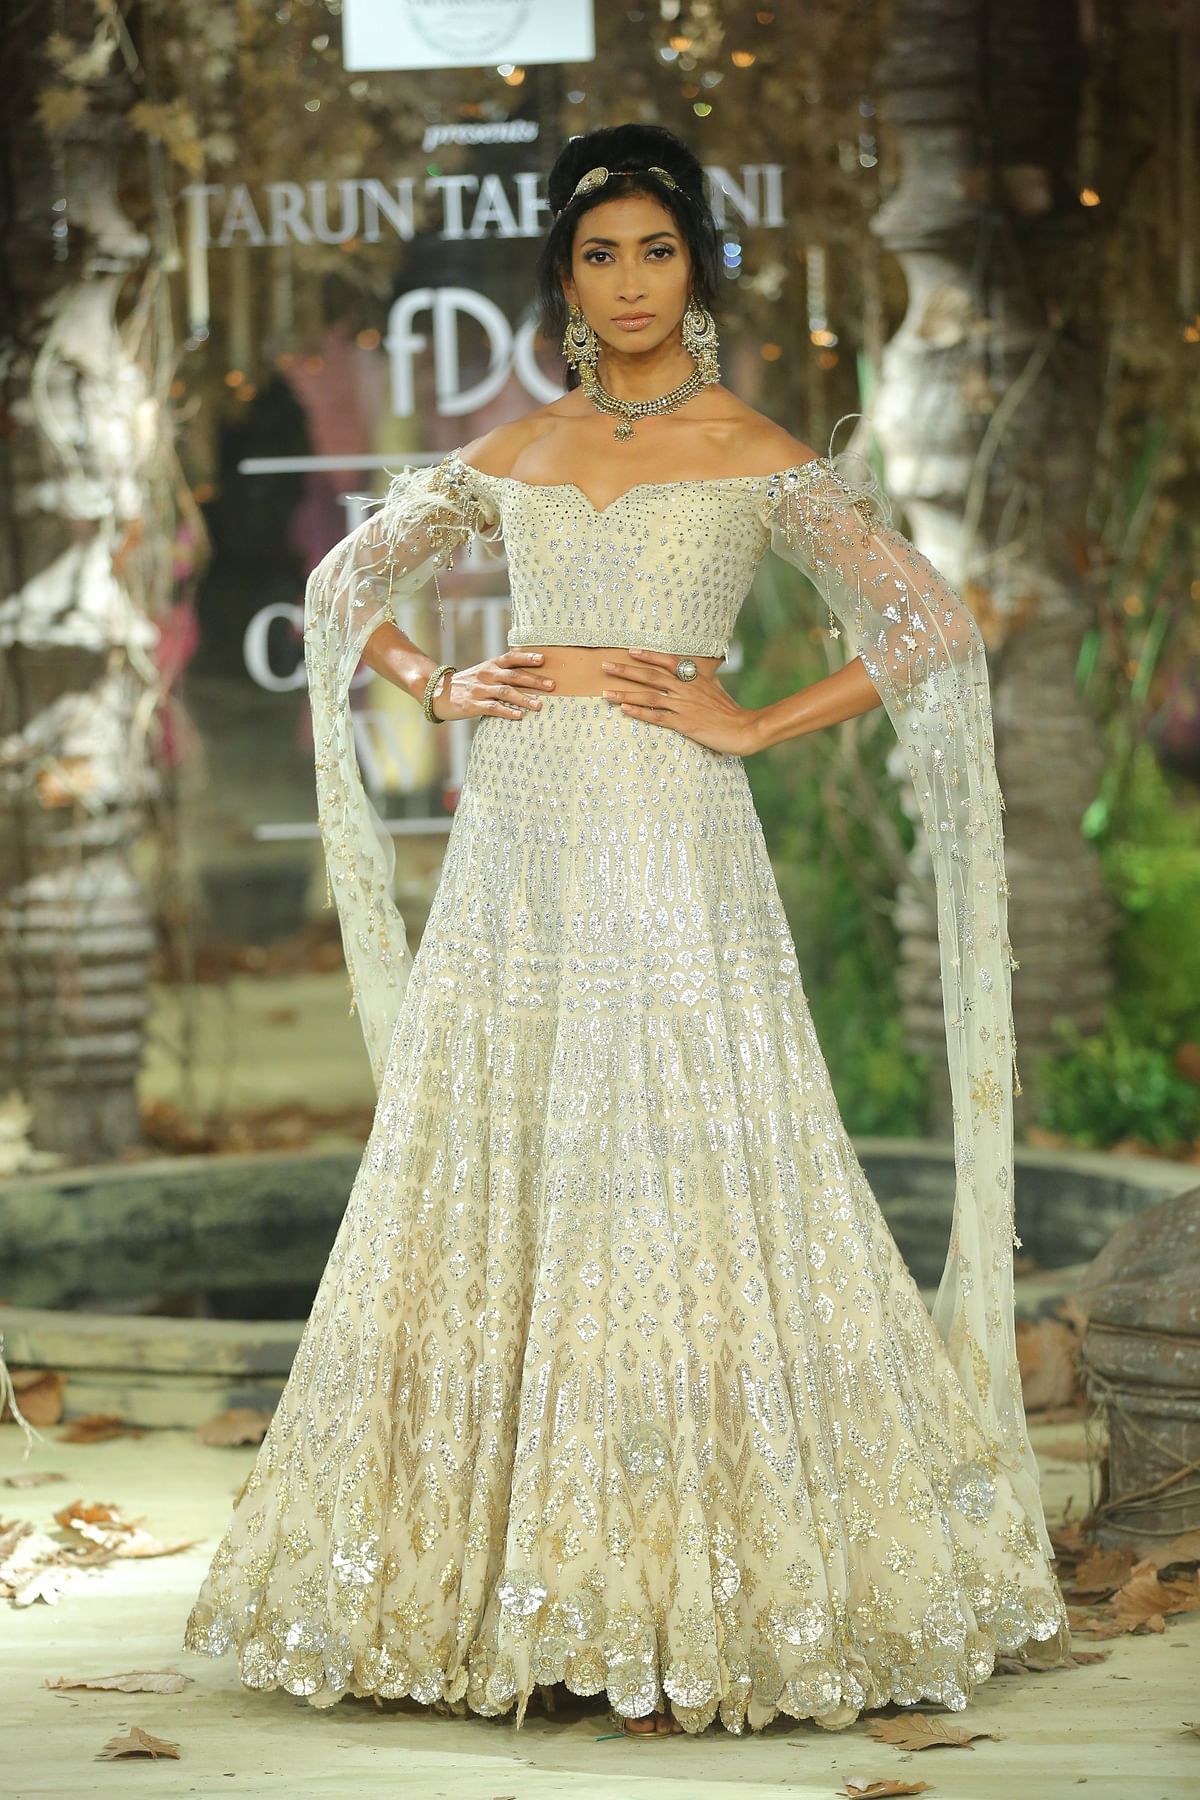 Tarun Tahiliani’s latest collection at the India Couture Week had subversion as the show-stopper.